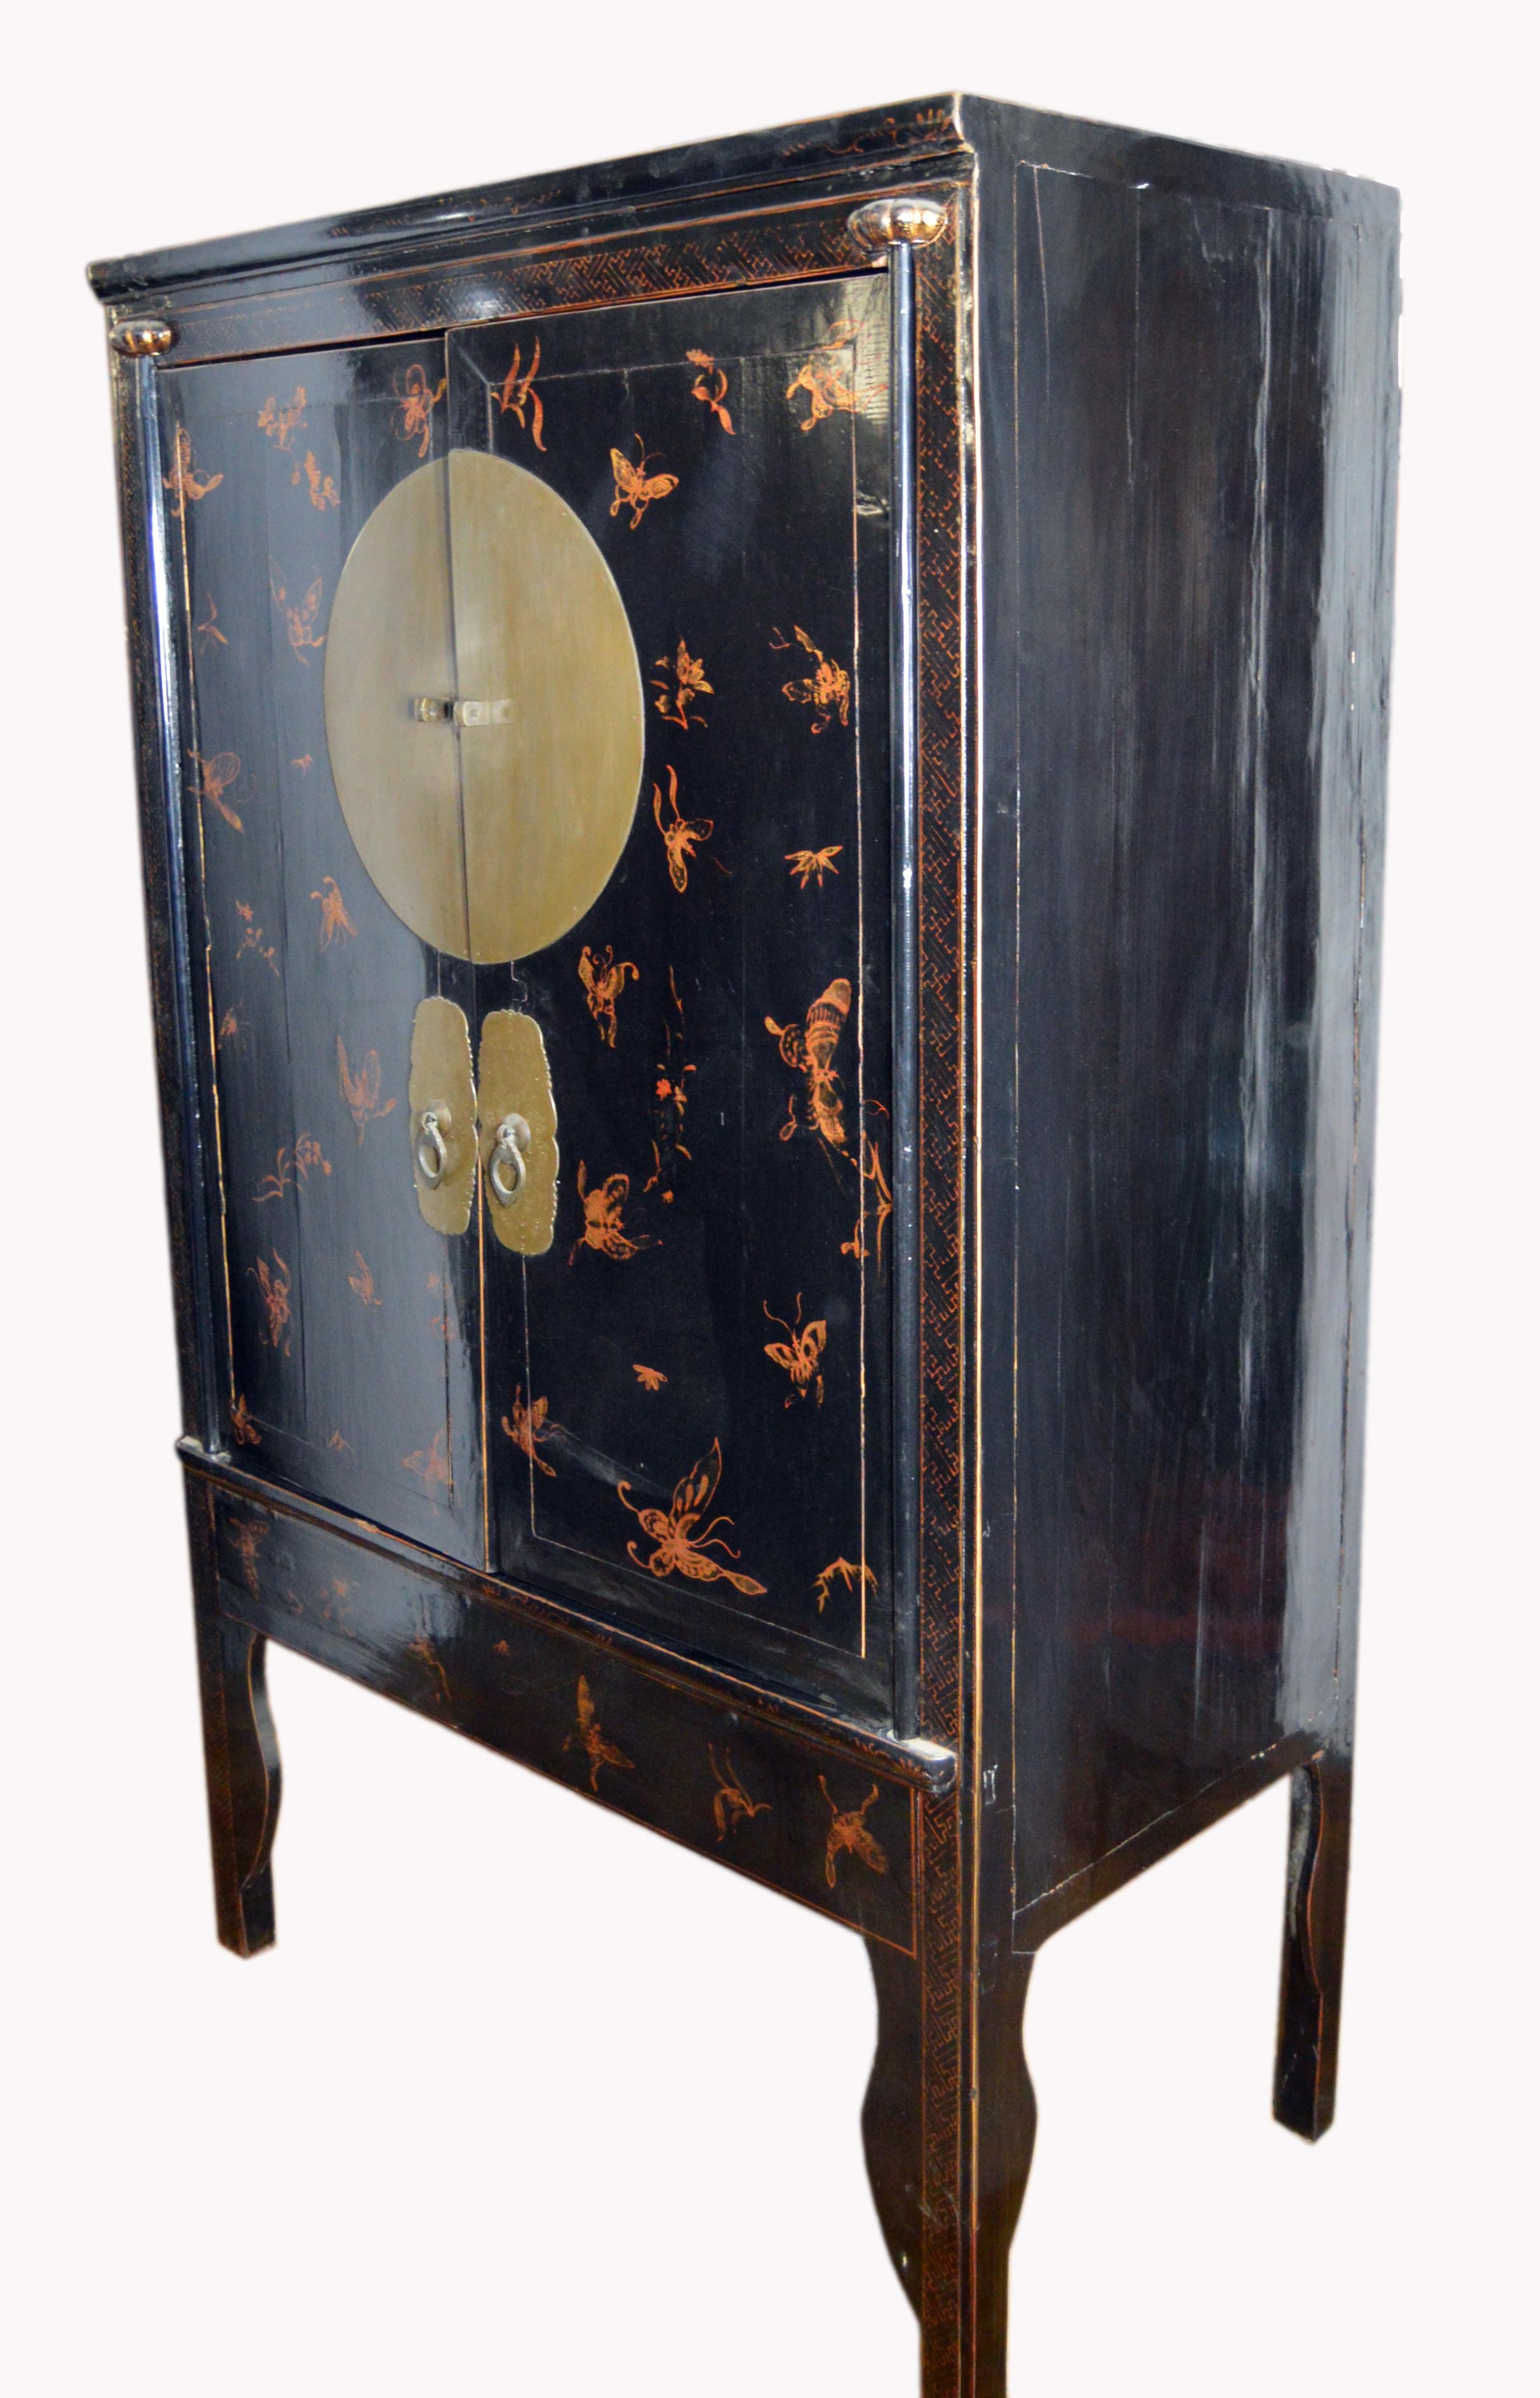 A Chinese 19th century wedding cabinet made with black lacquered wood and gilt painting. This armoire adopts a rectangular shape raised on undulating bracket feet in the front and simple straight legs in the back. The front legs are supported by a